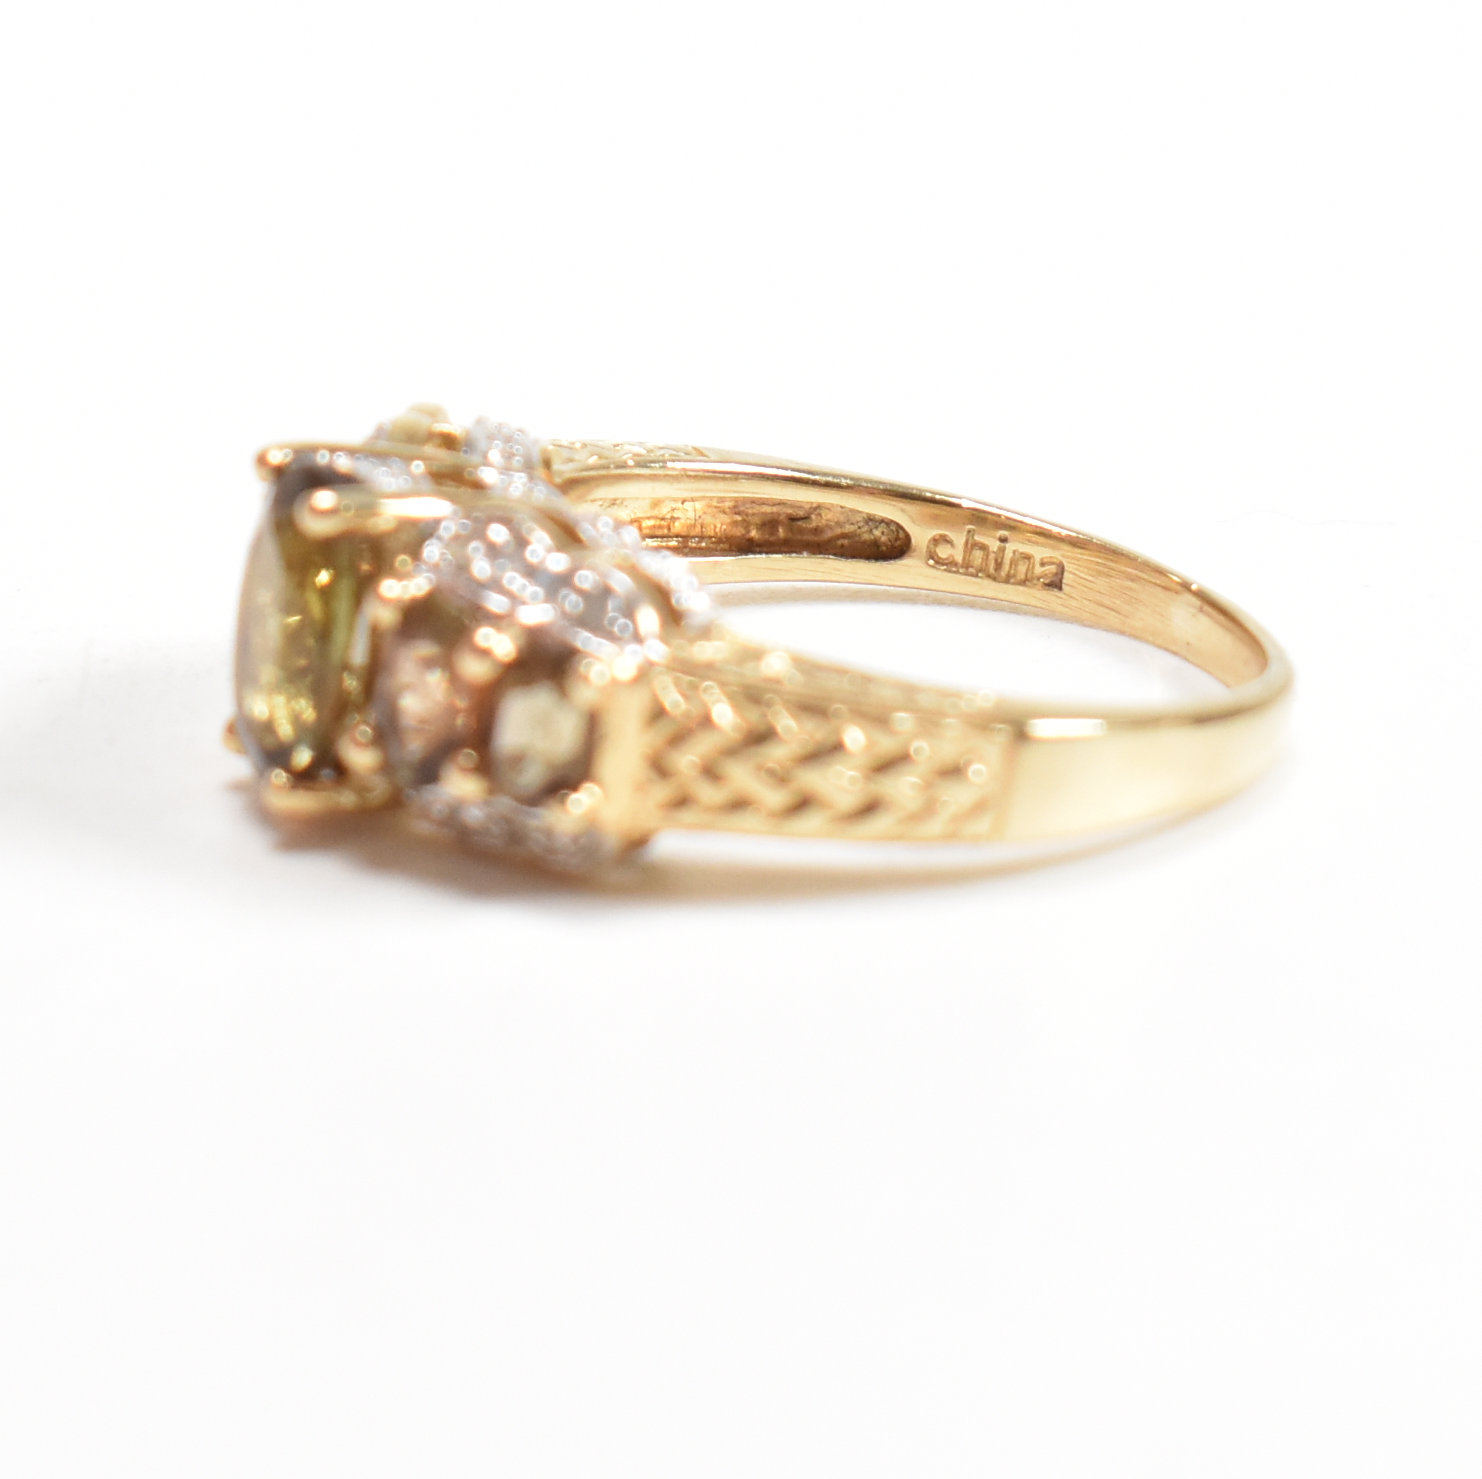 YELLOW GOLD ANDALUSITE & DIAMOND RING - Image 6 of 7